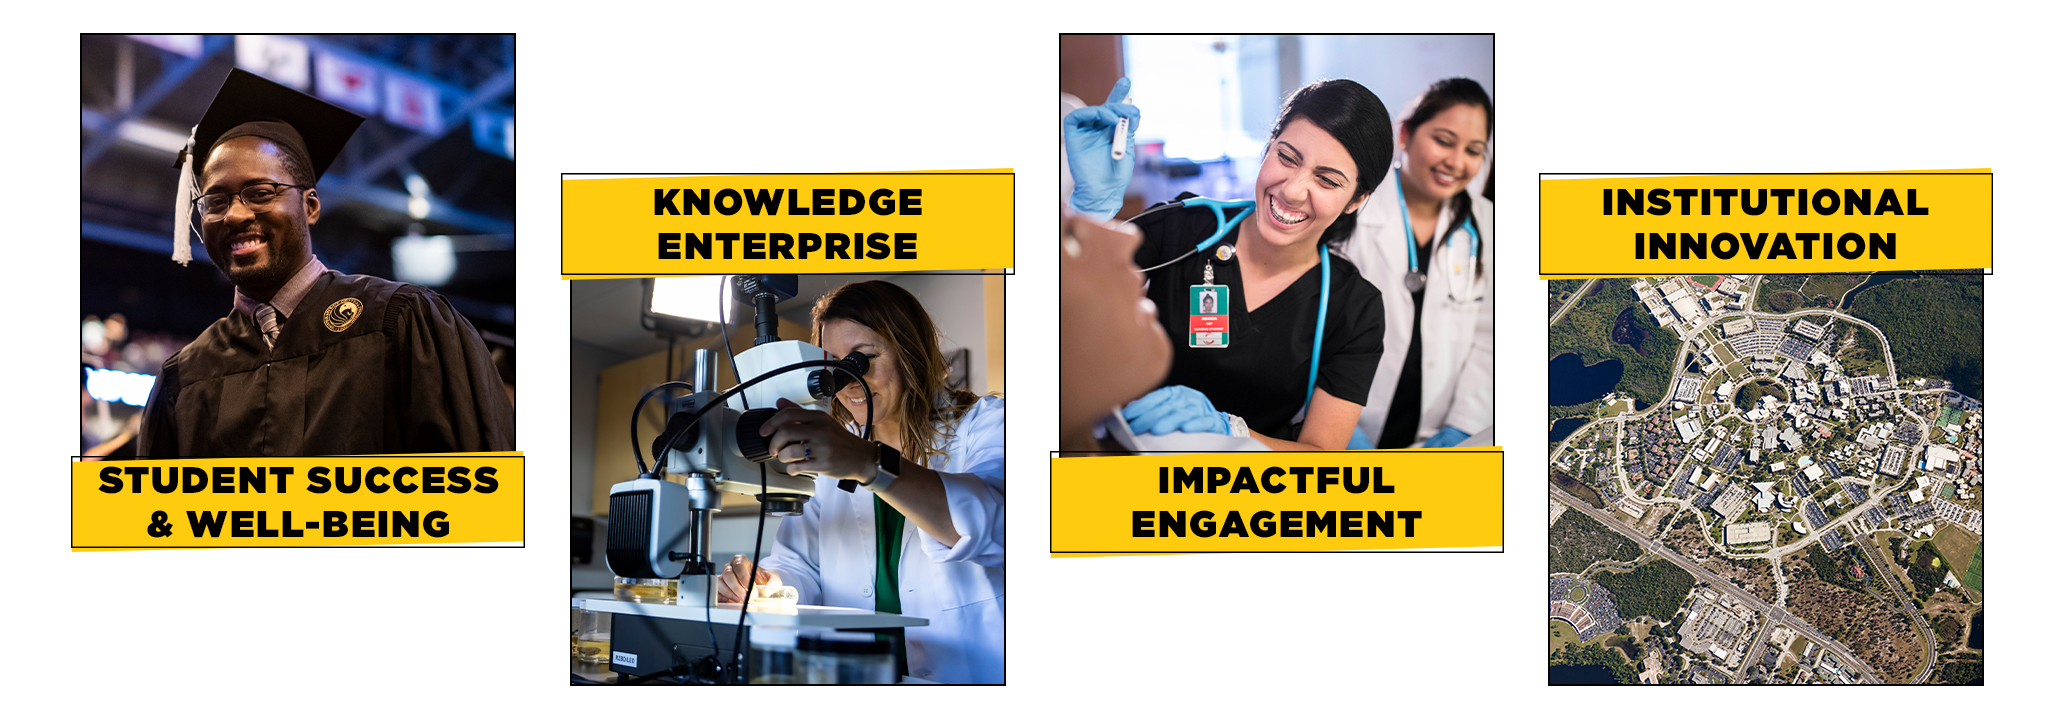 4 images, from left to right: Student Success & well-being, knowledge enterprise, impactful engagement, institutional innovation